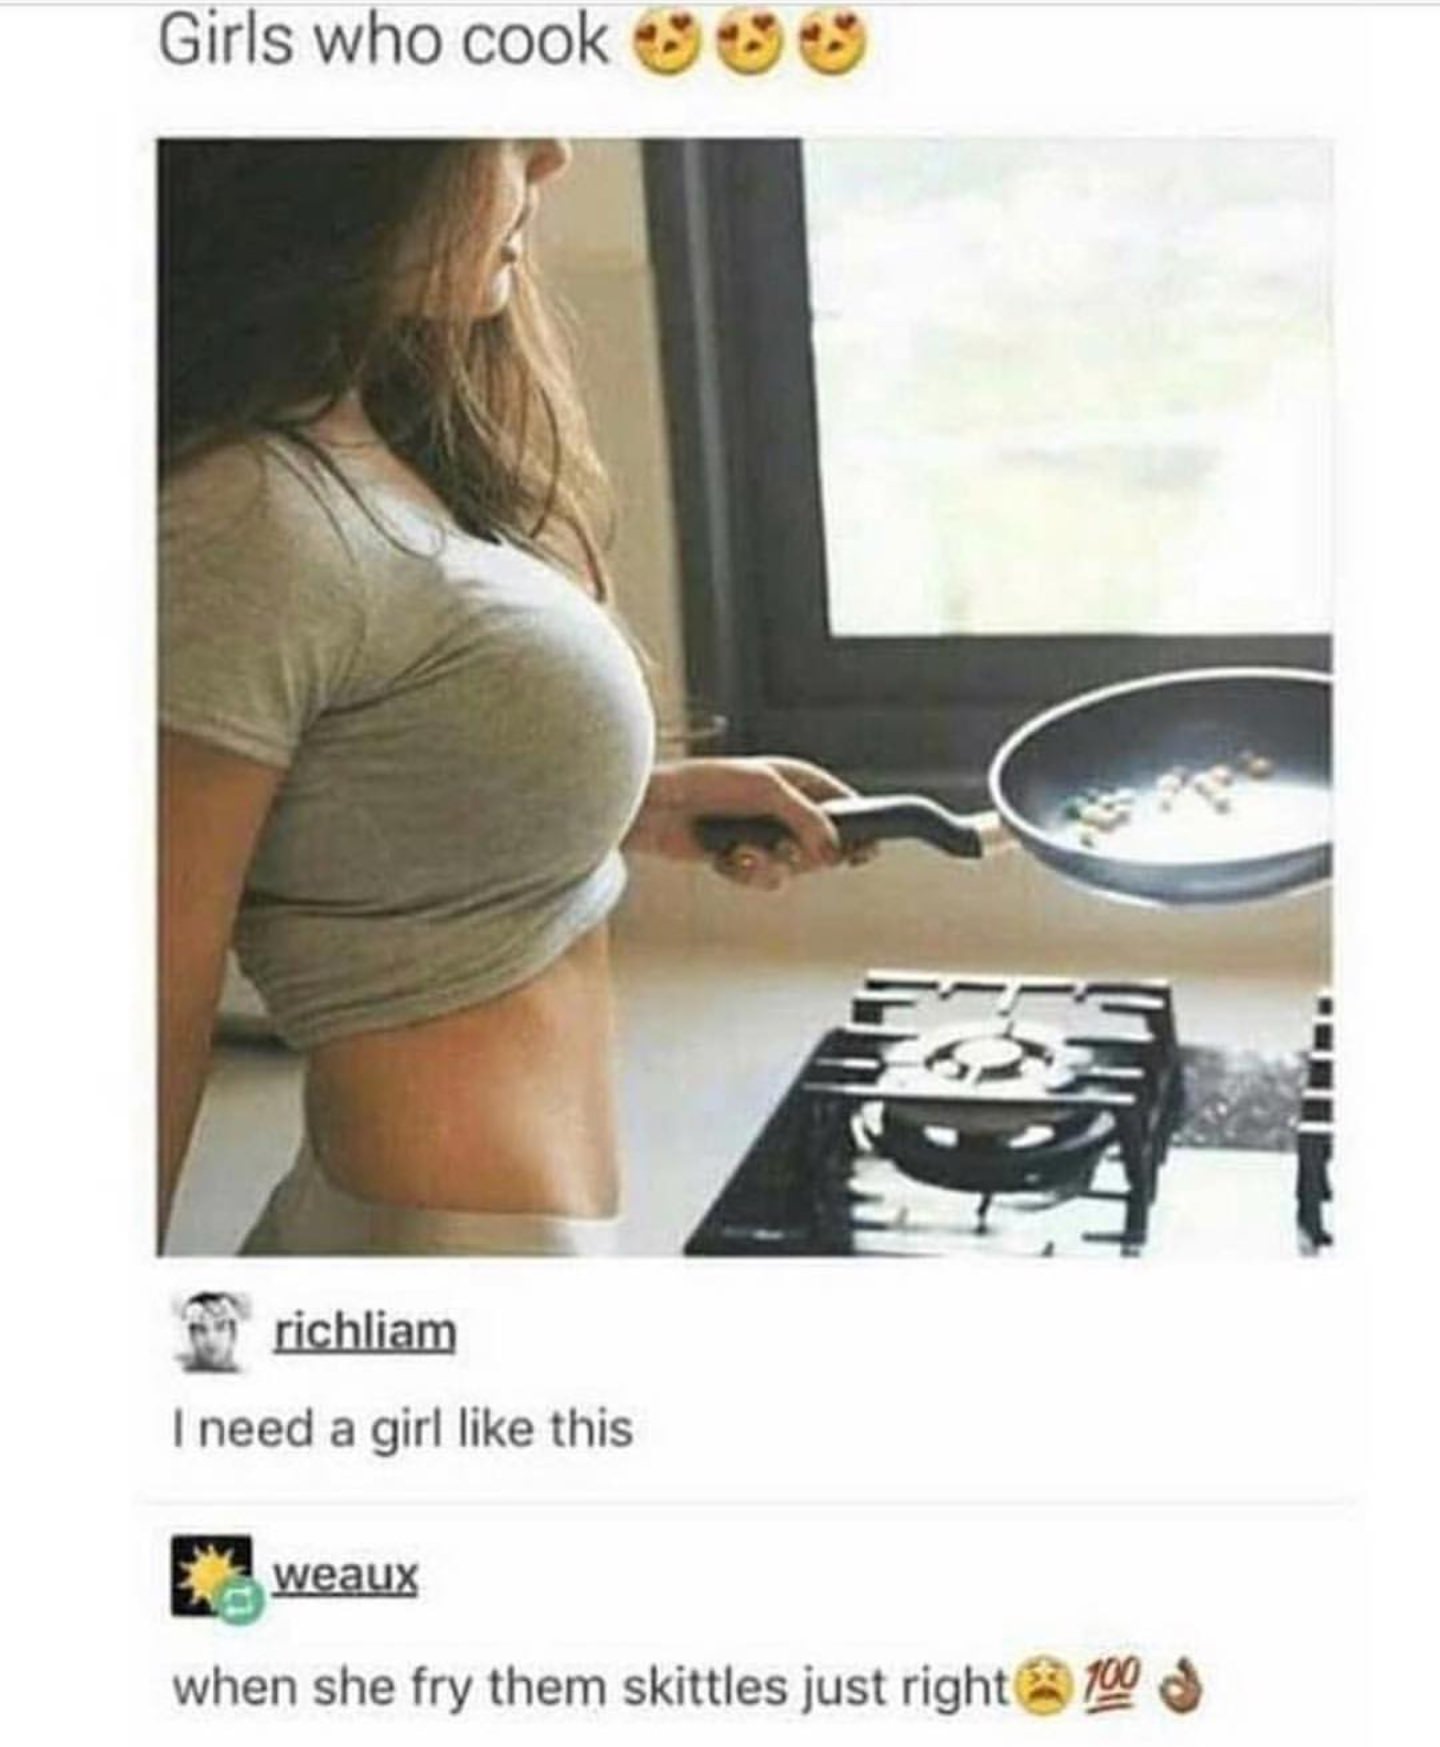 hot girl cooking skittles - Girls who cook richliam I need a girl this weaux when she fry them skittles just right 2008